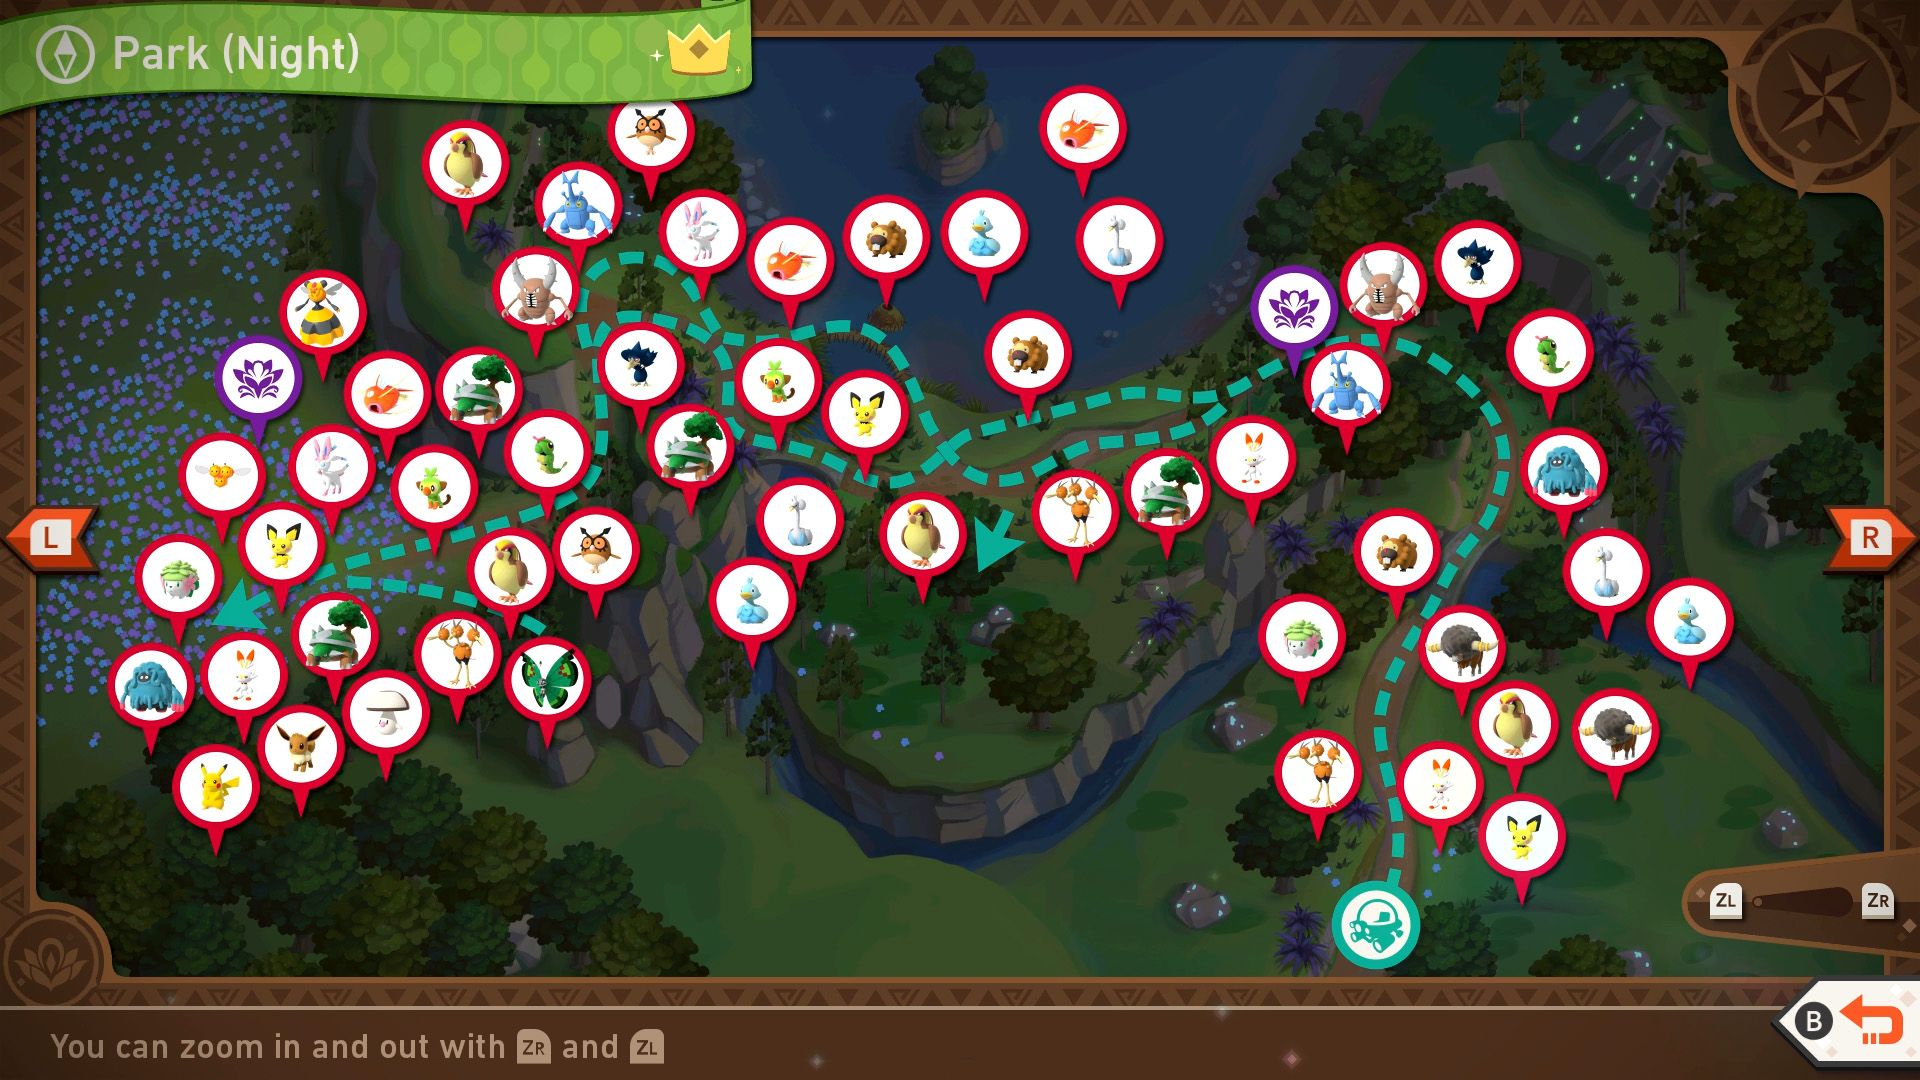 A complete map of the Florio Nature Park (Night) course after the 2.0 update